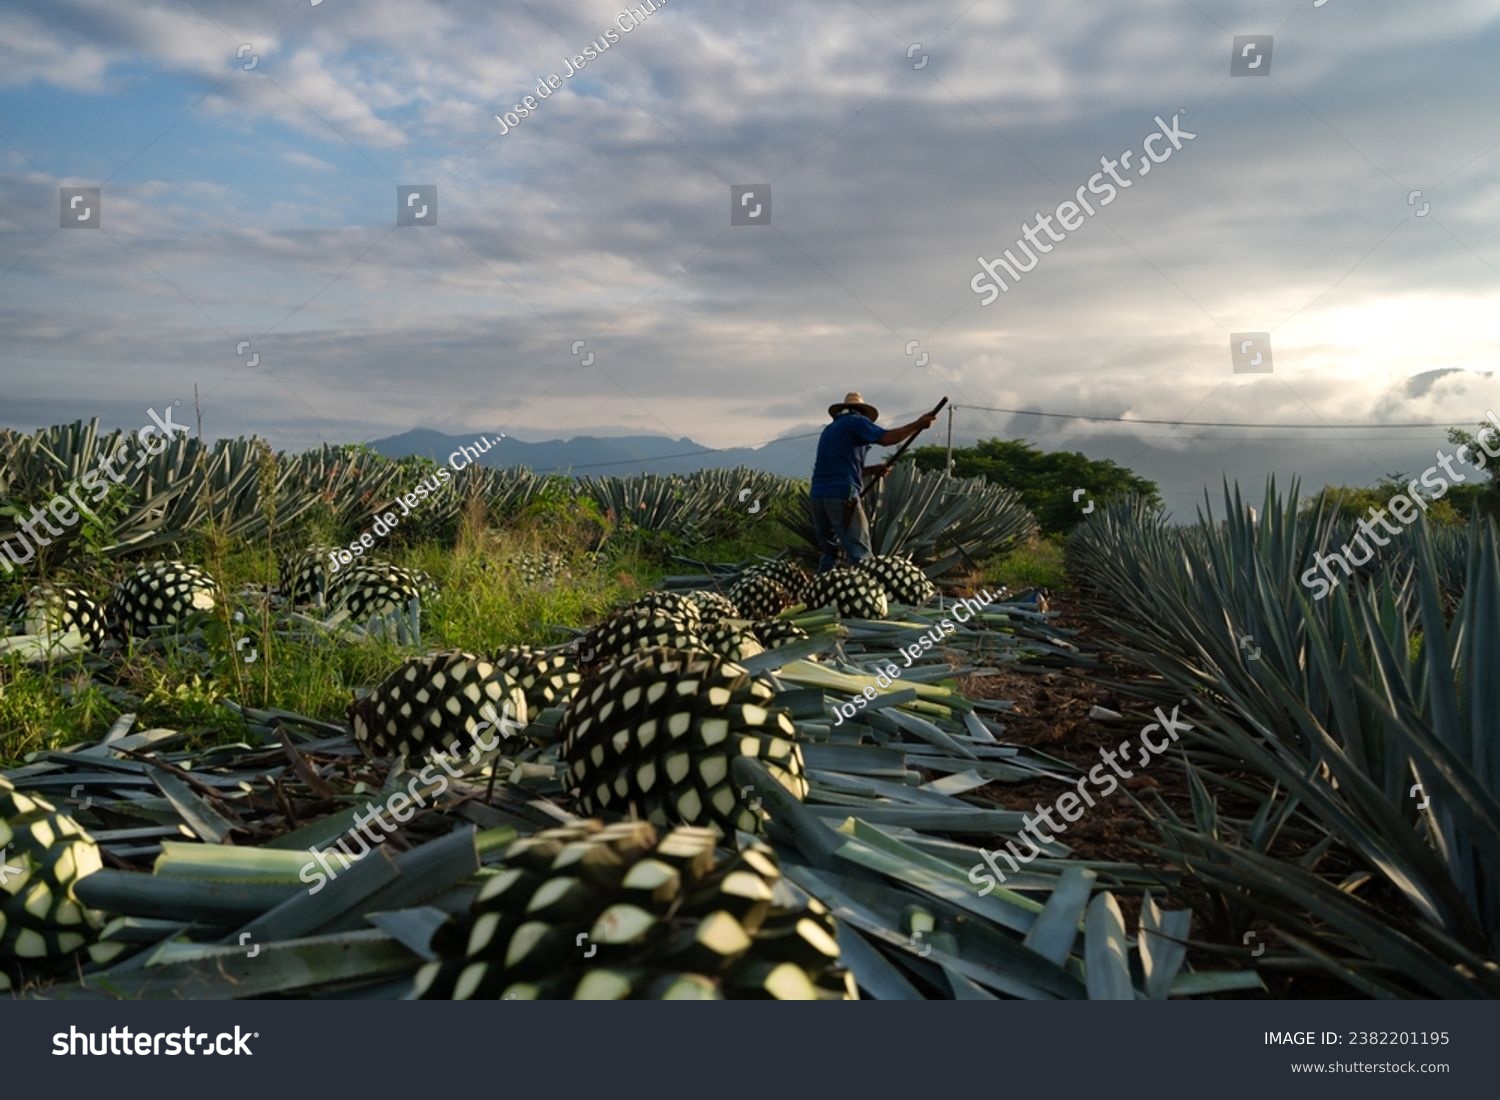 At dawn the farmer is cutting several agave plants in the field of Tequila Jalisco. #2382201195